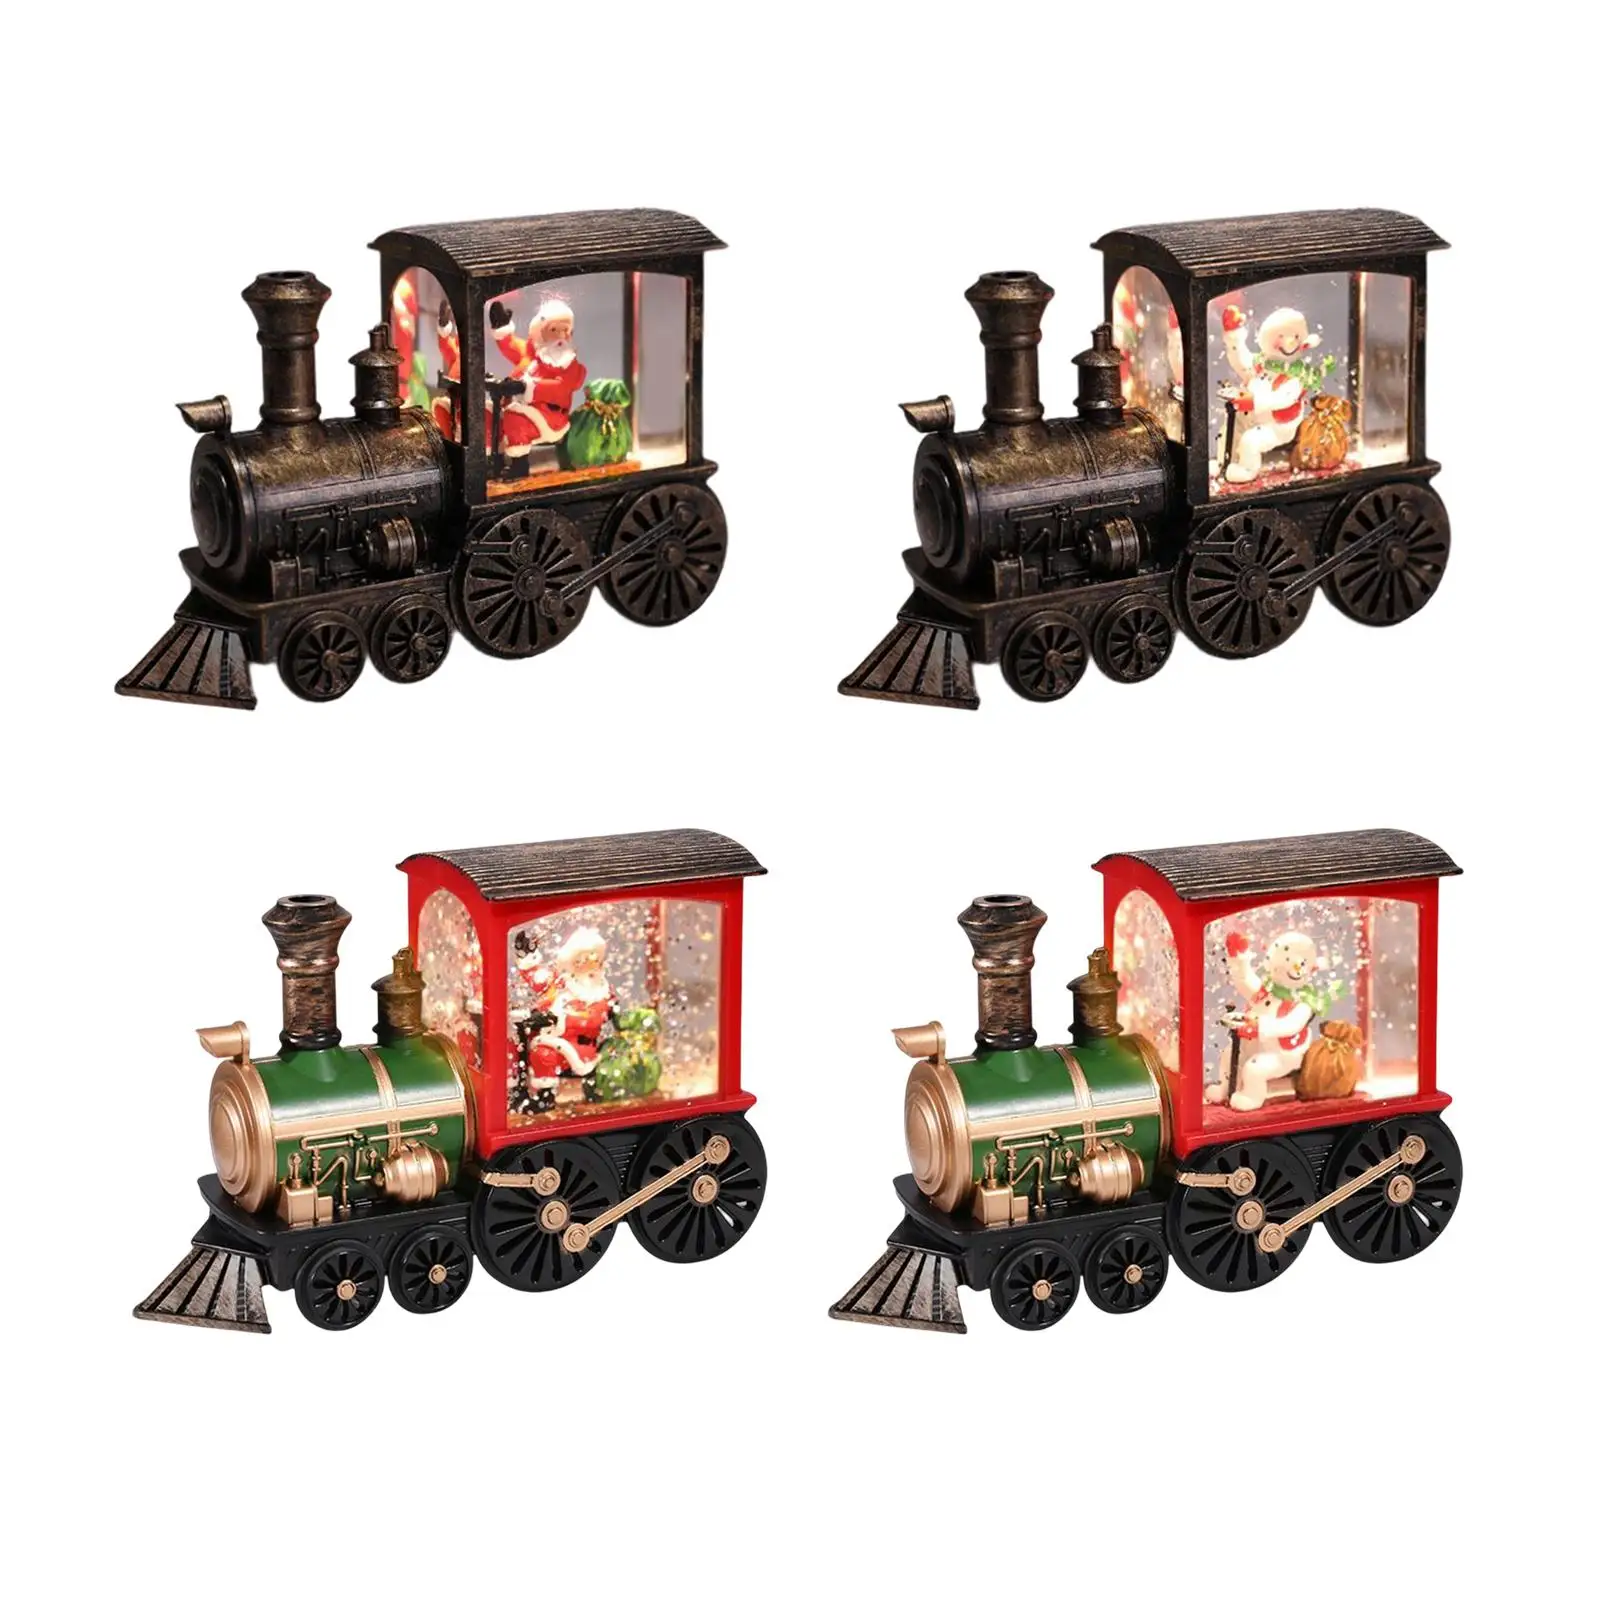 

Christmas Lantern Train New Year Decorations Scene Table Centerpiece for Bookshelves Parents Bedroom Wife Fireplace Mantel